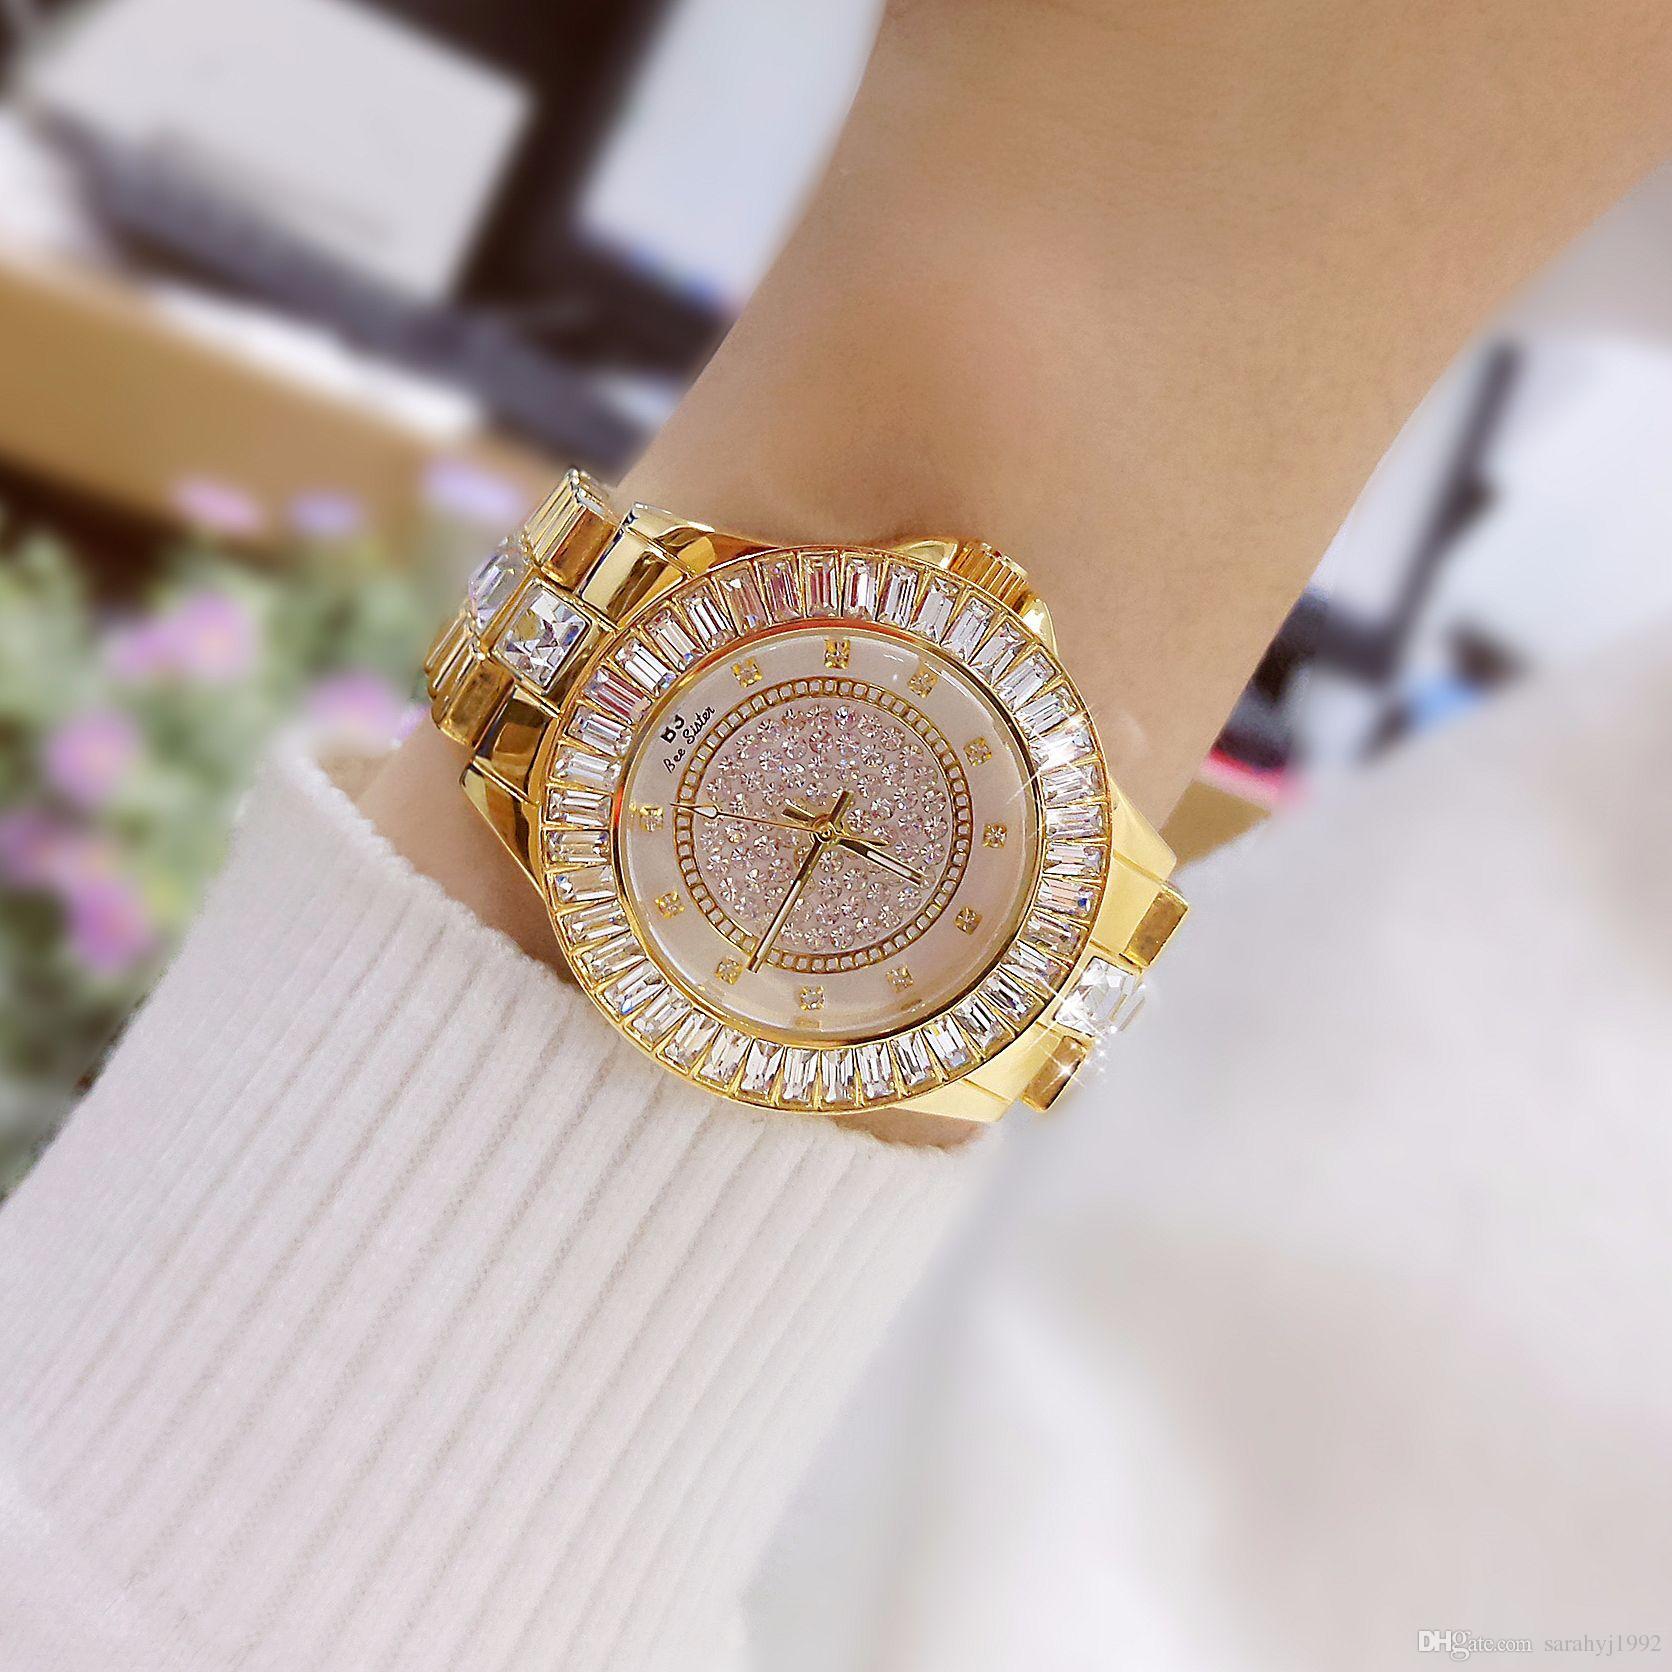 Women's Watches: What You Need To Know - WS6 Blog